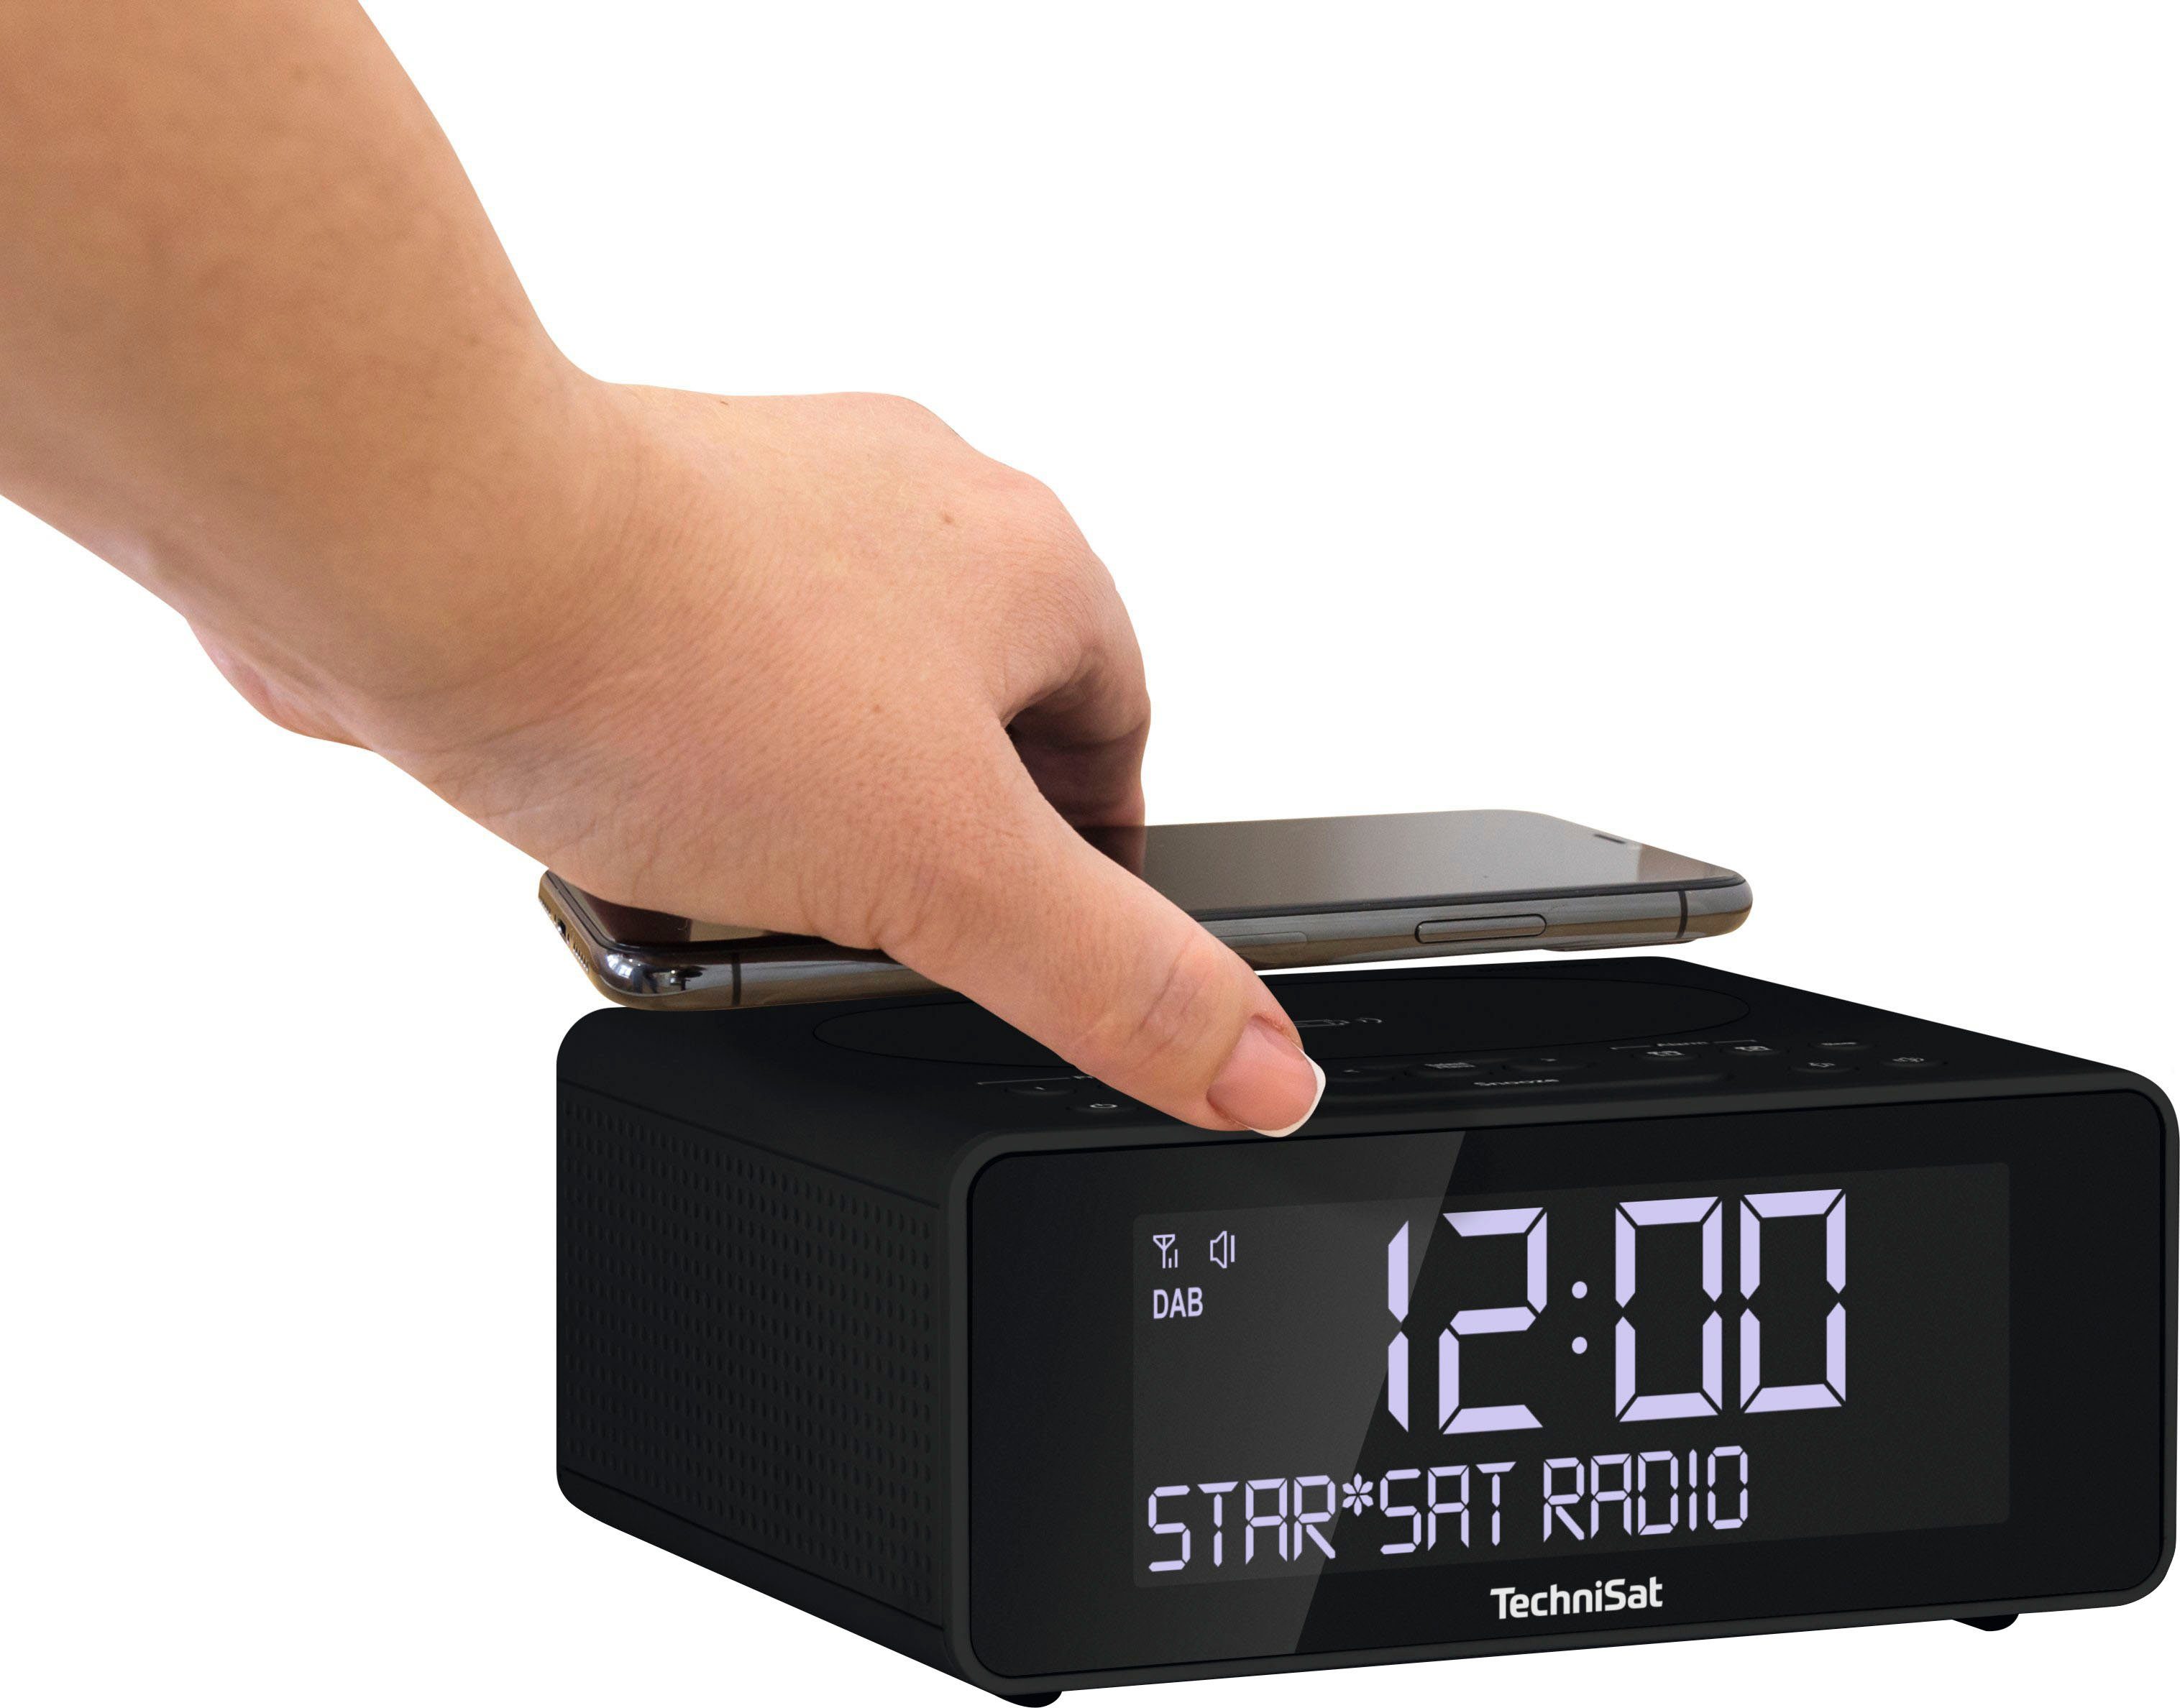 TechniSat Radiowecker »DIGITRADIO 52 Stereo« mit DAB+, Snooze-Funktion, dimmbares Display, Sleeptimer, Wireless Charging-Otto